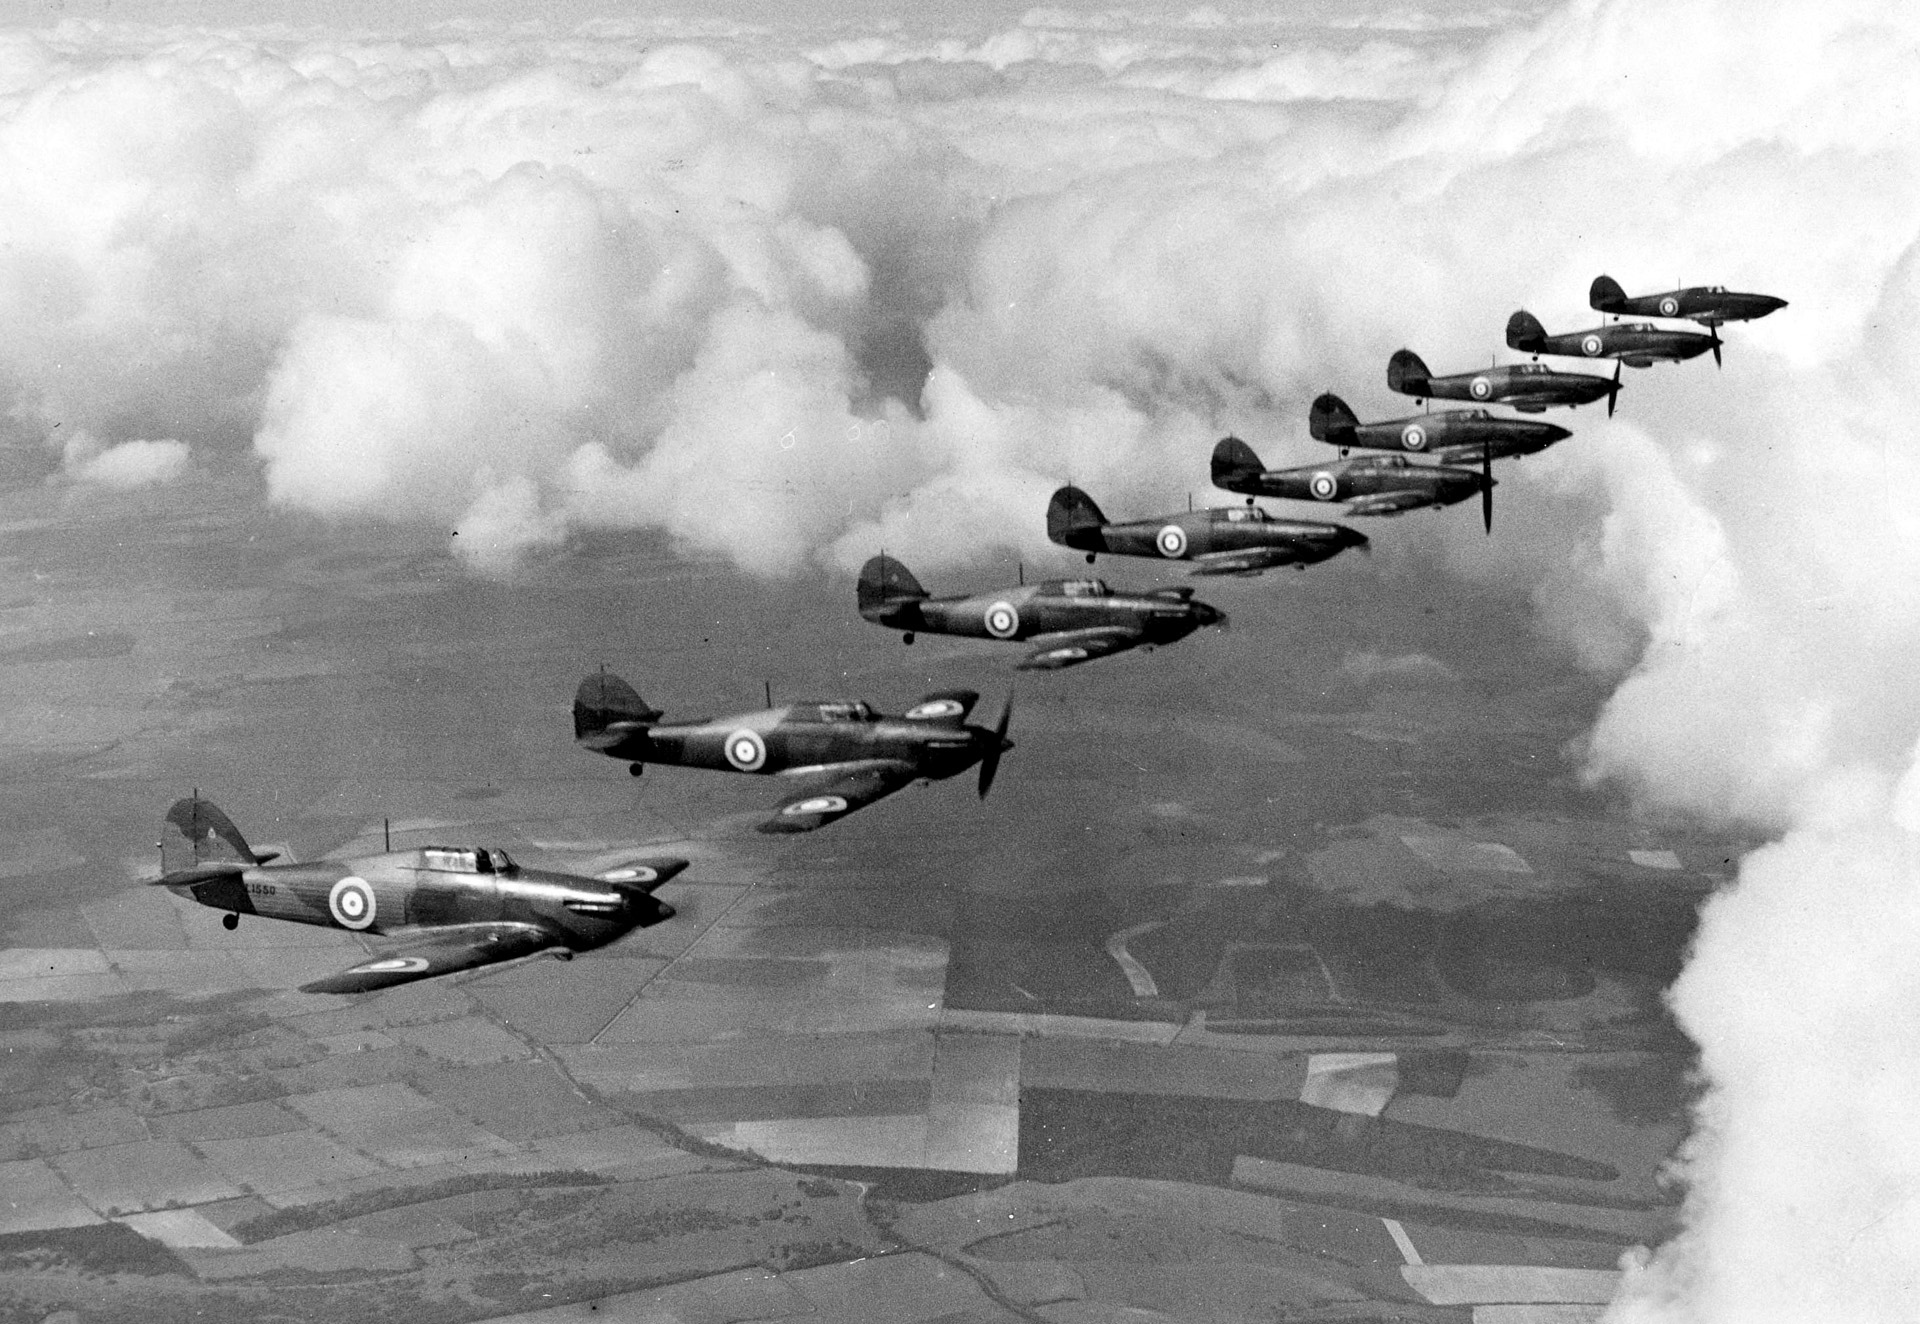 Flying wingtip-to-wingtip, a formation of RAF Hawker Hurricanes from No. 111 Squadron glides above the English countryside. While the Spitfire is more famous today, the Hurricane was the first monoplane fighter to exceed 300 miles per hour and accounted for many “kills" against the Luftwaffe.